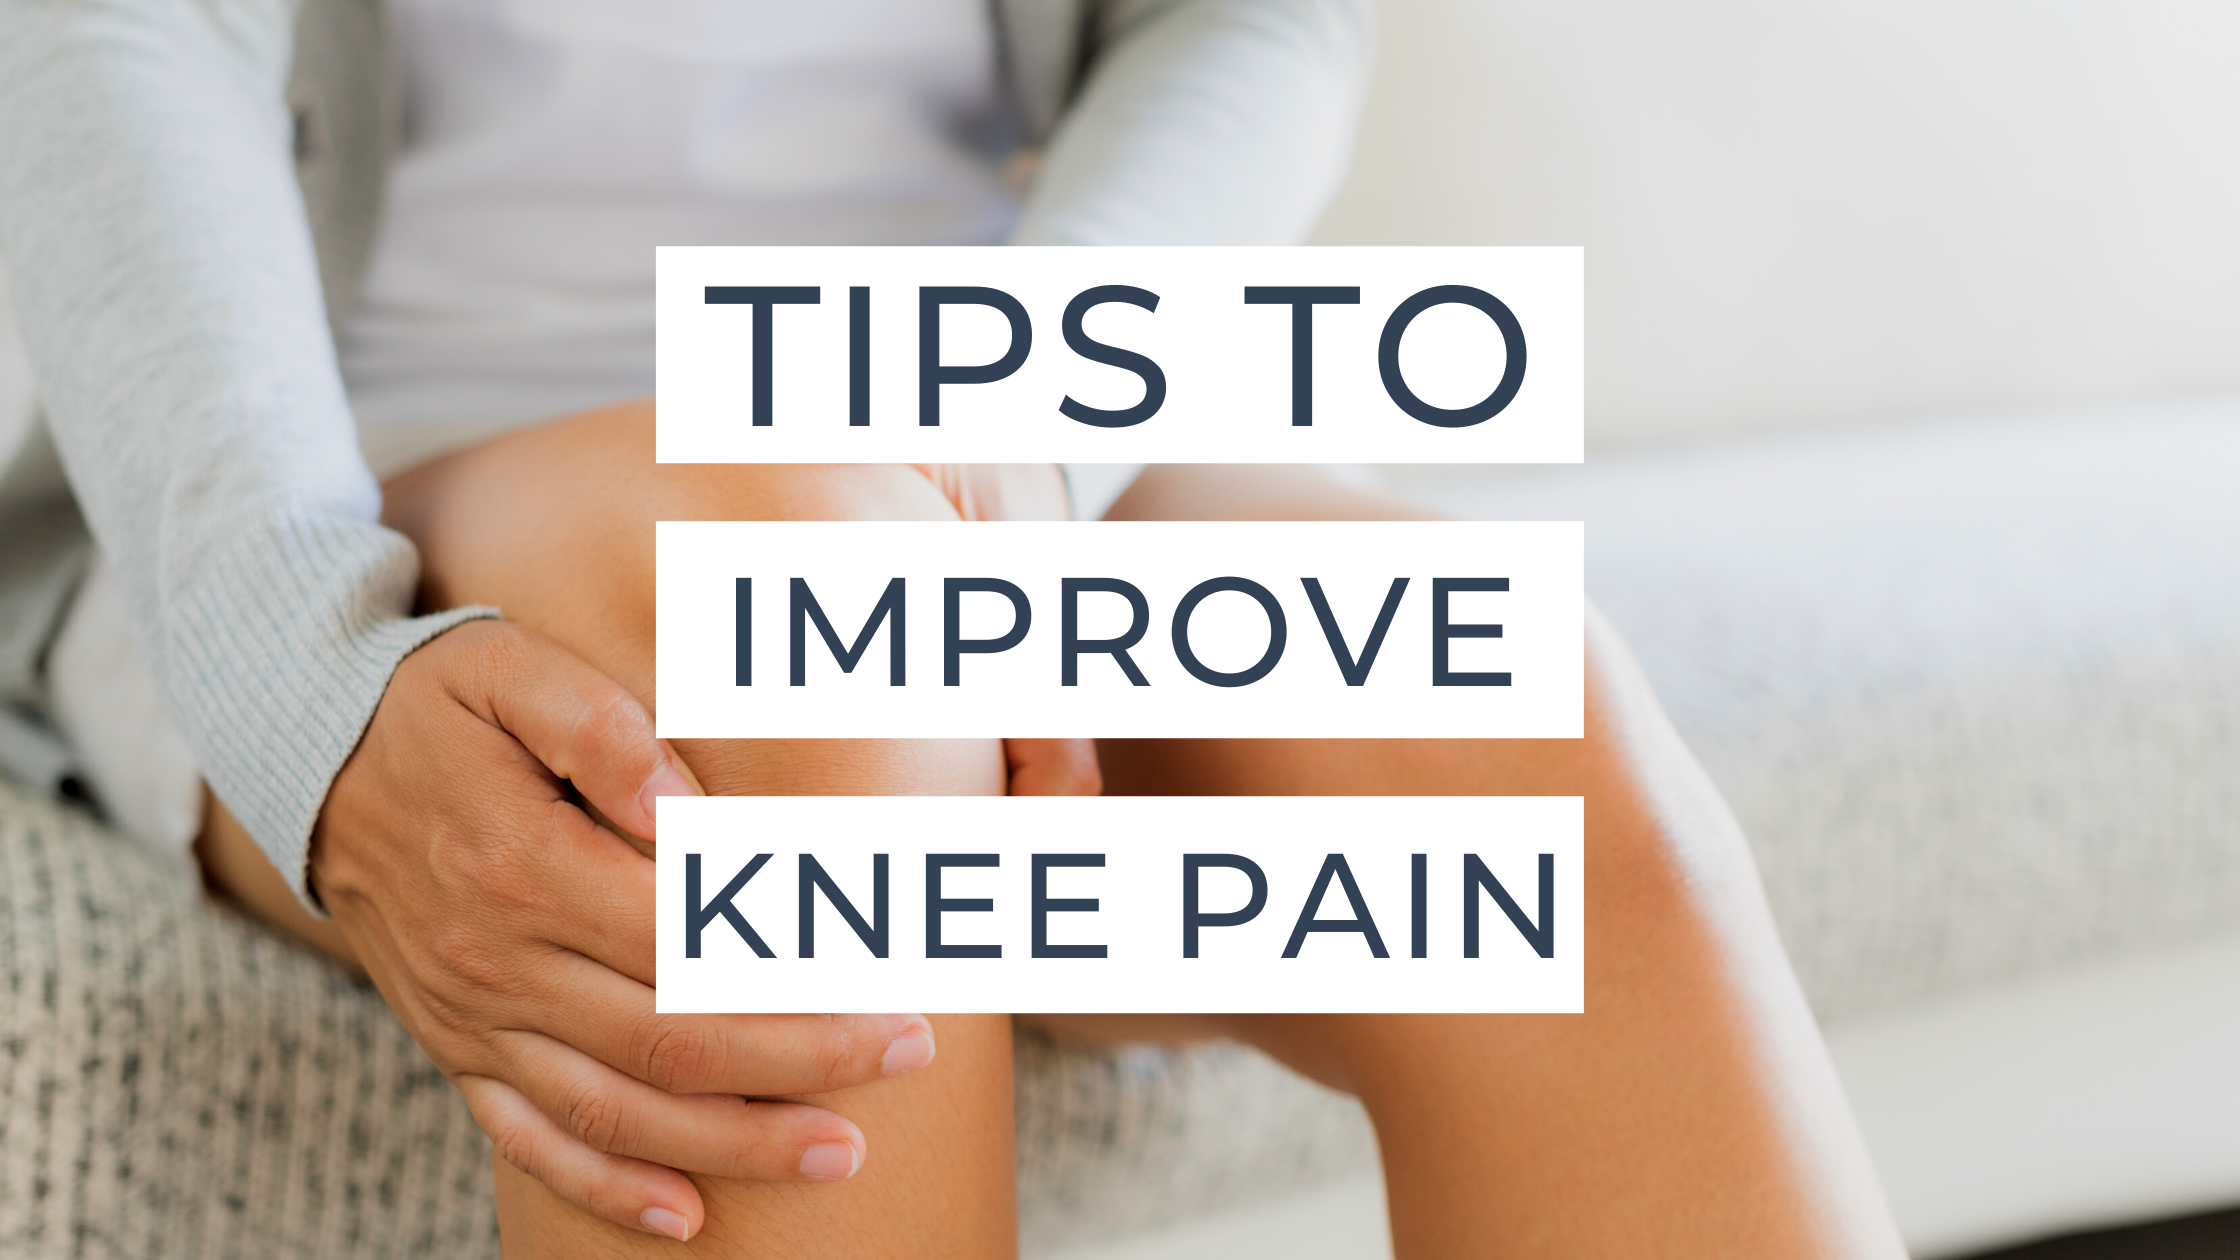 Tips to improve knee pain